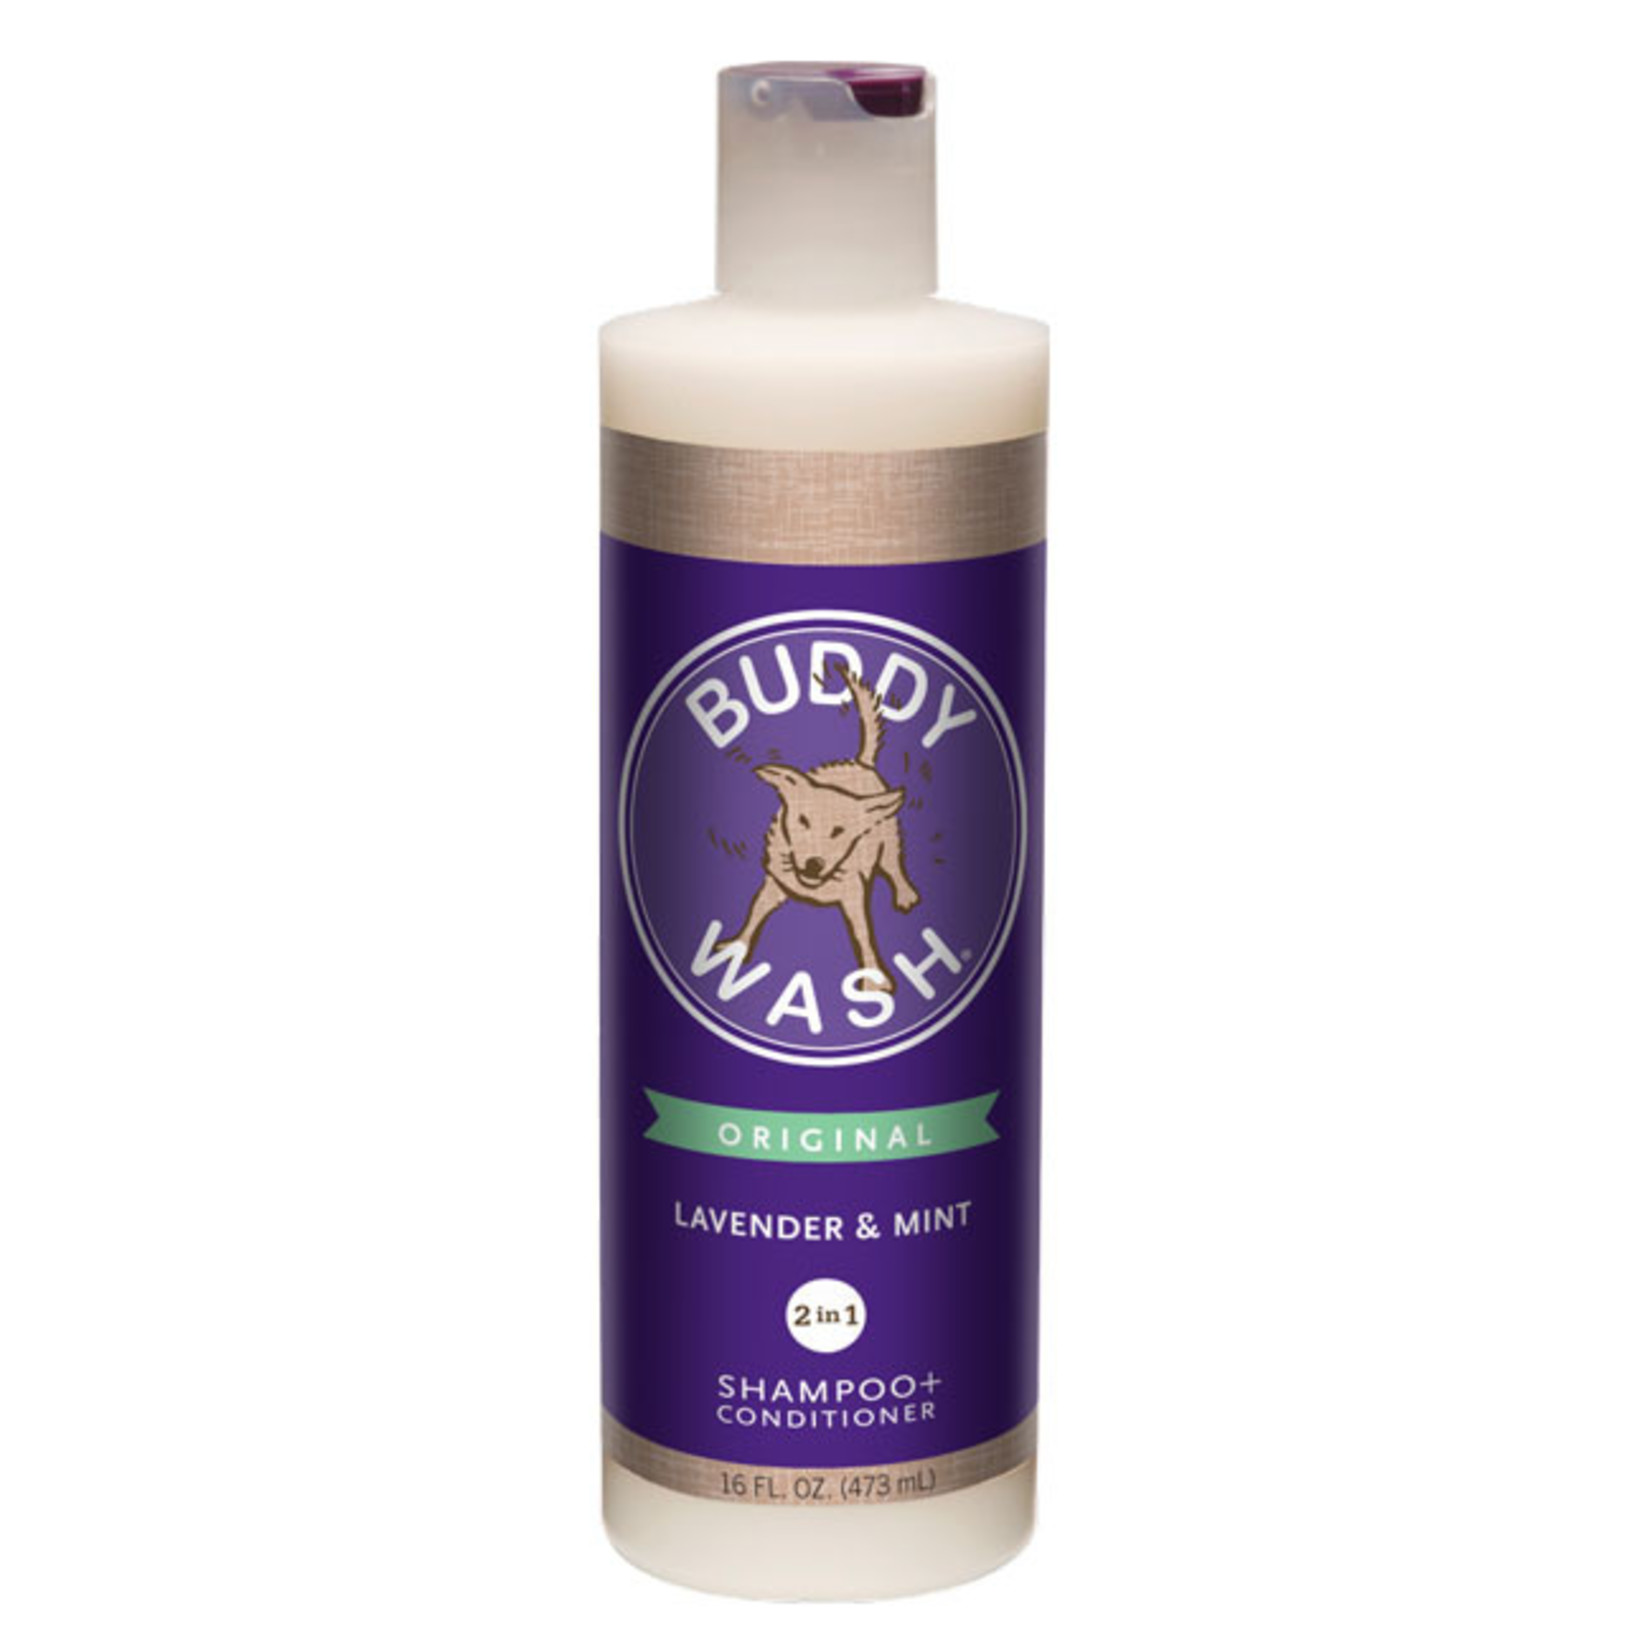 Cloud Star Buddy Wash 2-in-1 Lavender & Mint Shampoo & Conditioner for Dogs 16oz